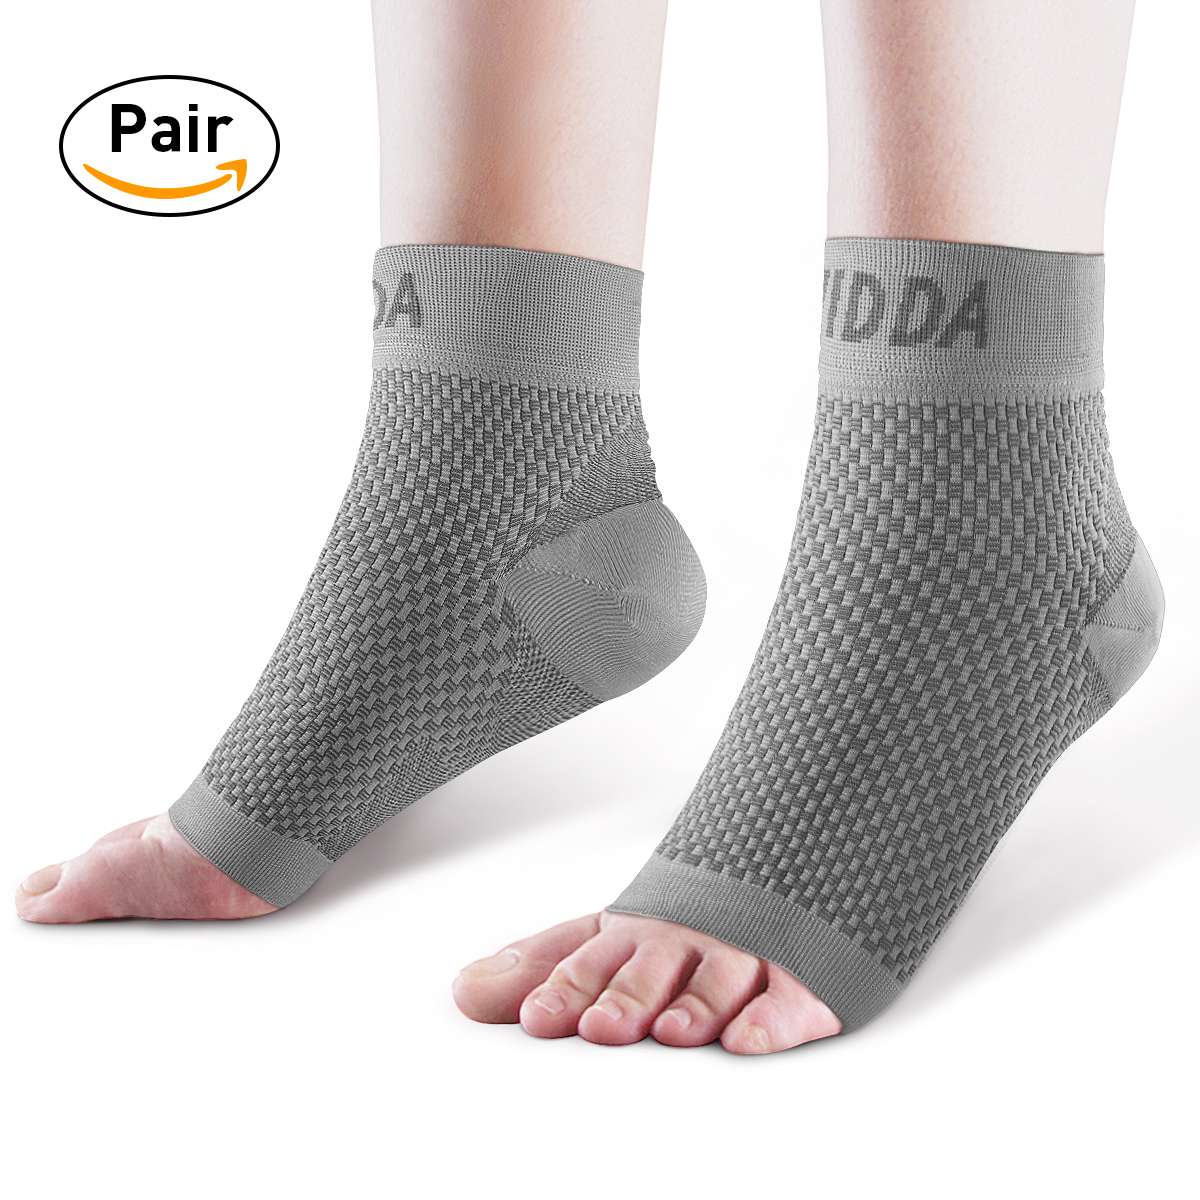 Ankle Brace for Men Women Pair AVIDDA Plantar Fasciitis Socks with Arch Support Compression Ankle Support Foot Sleeve for Achilles Tendon Support Swelling Eases Heel Pain Relief Gray Large